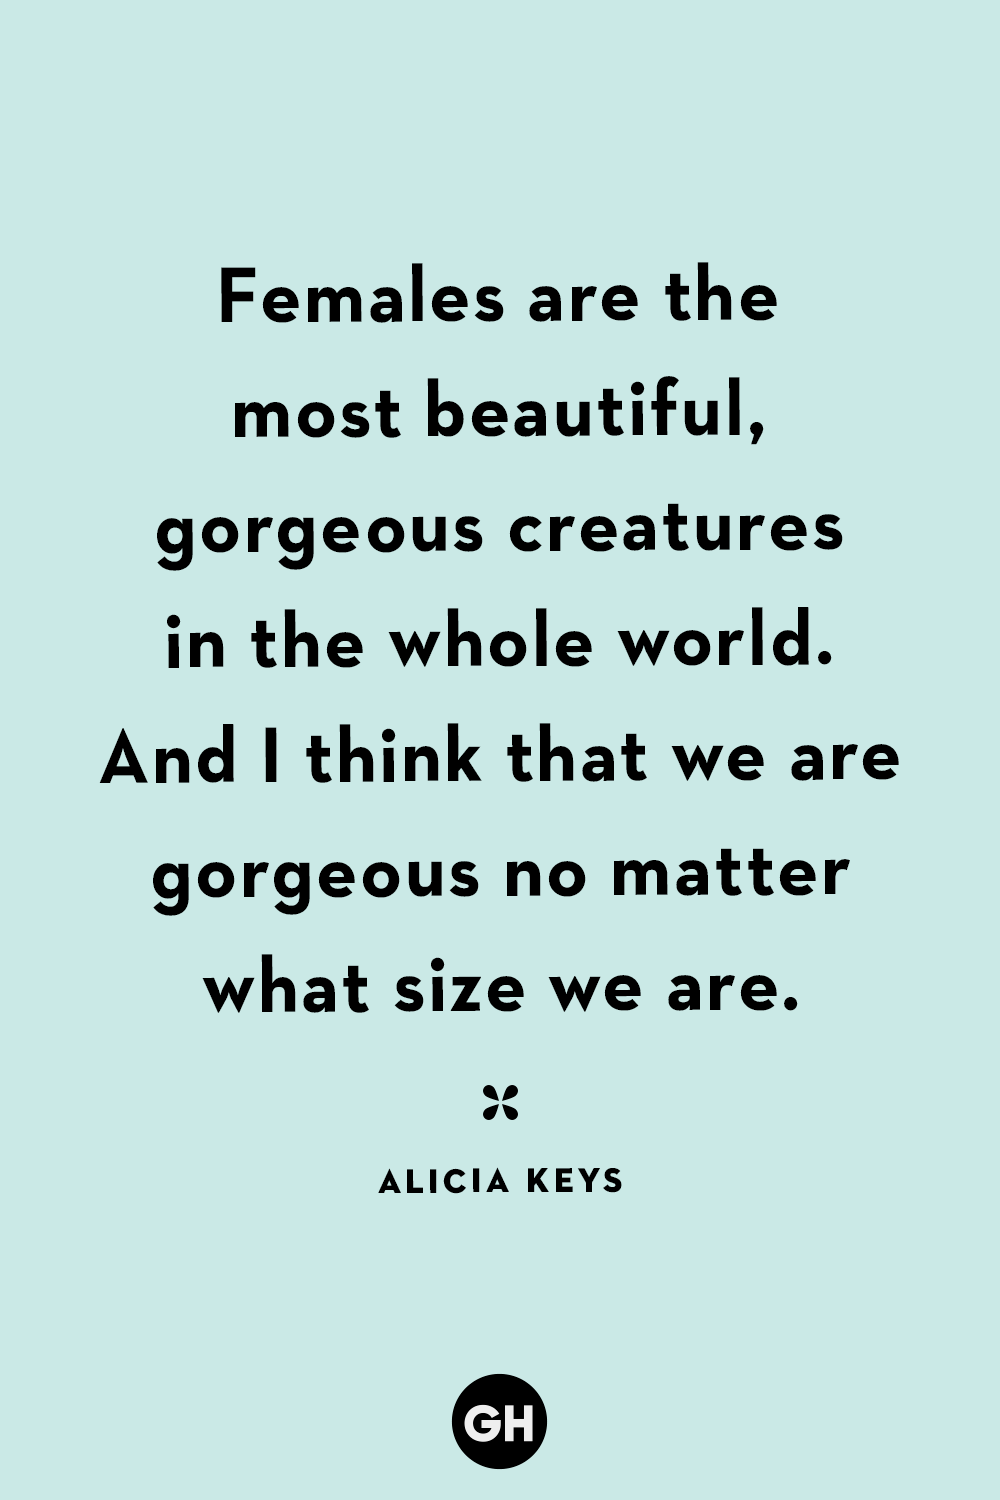 quotes about beautiful women